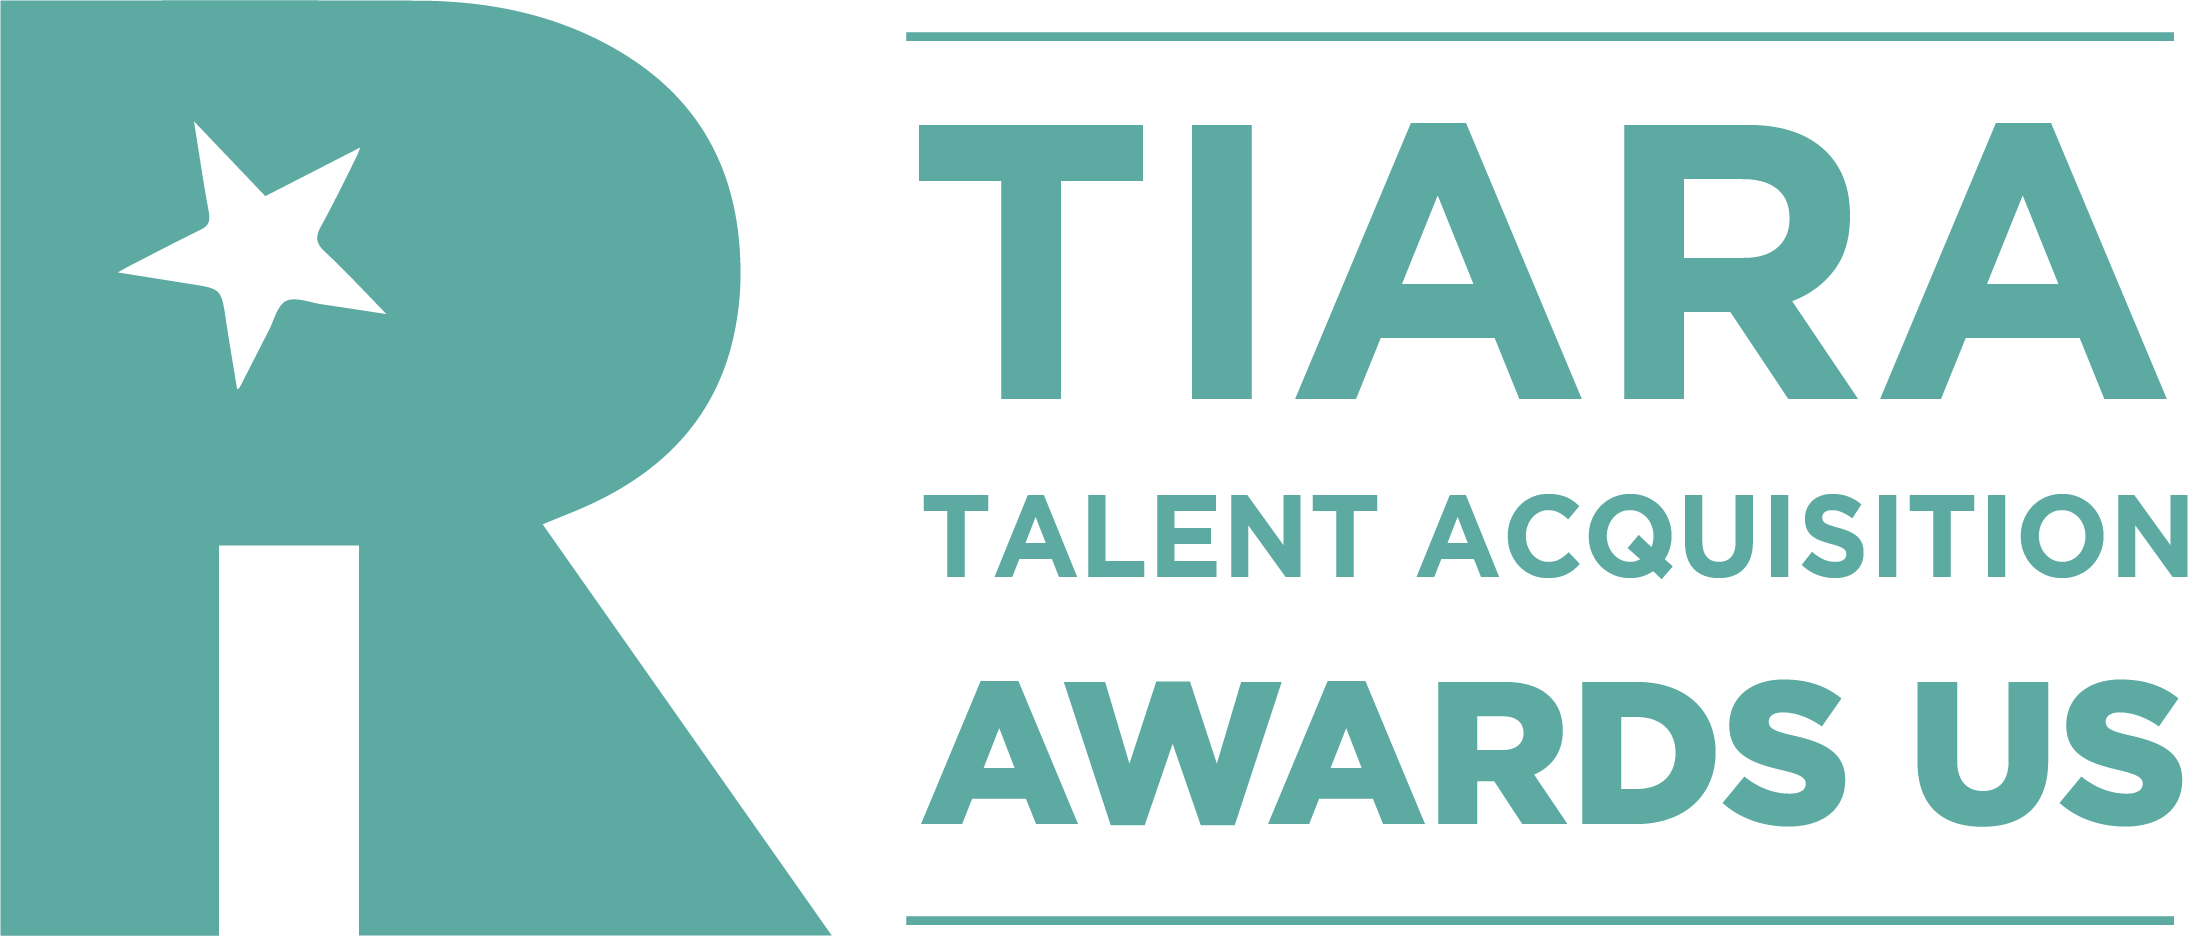 The TIARA Talent Acquisition Awards